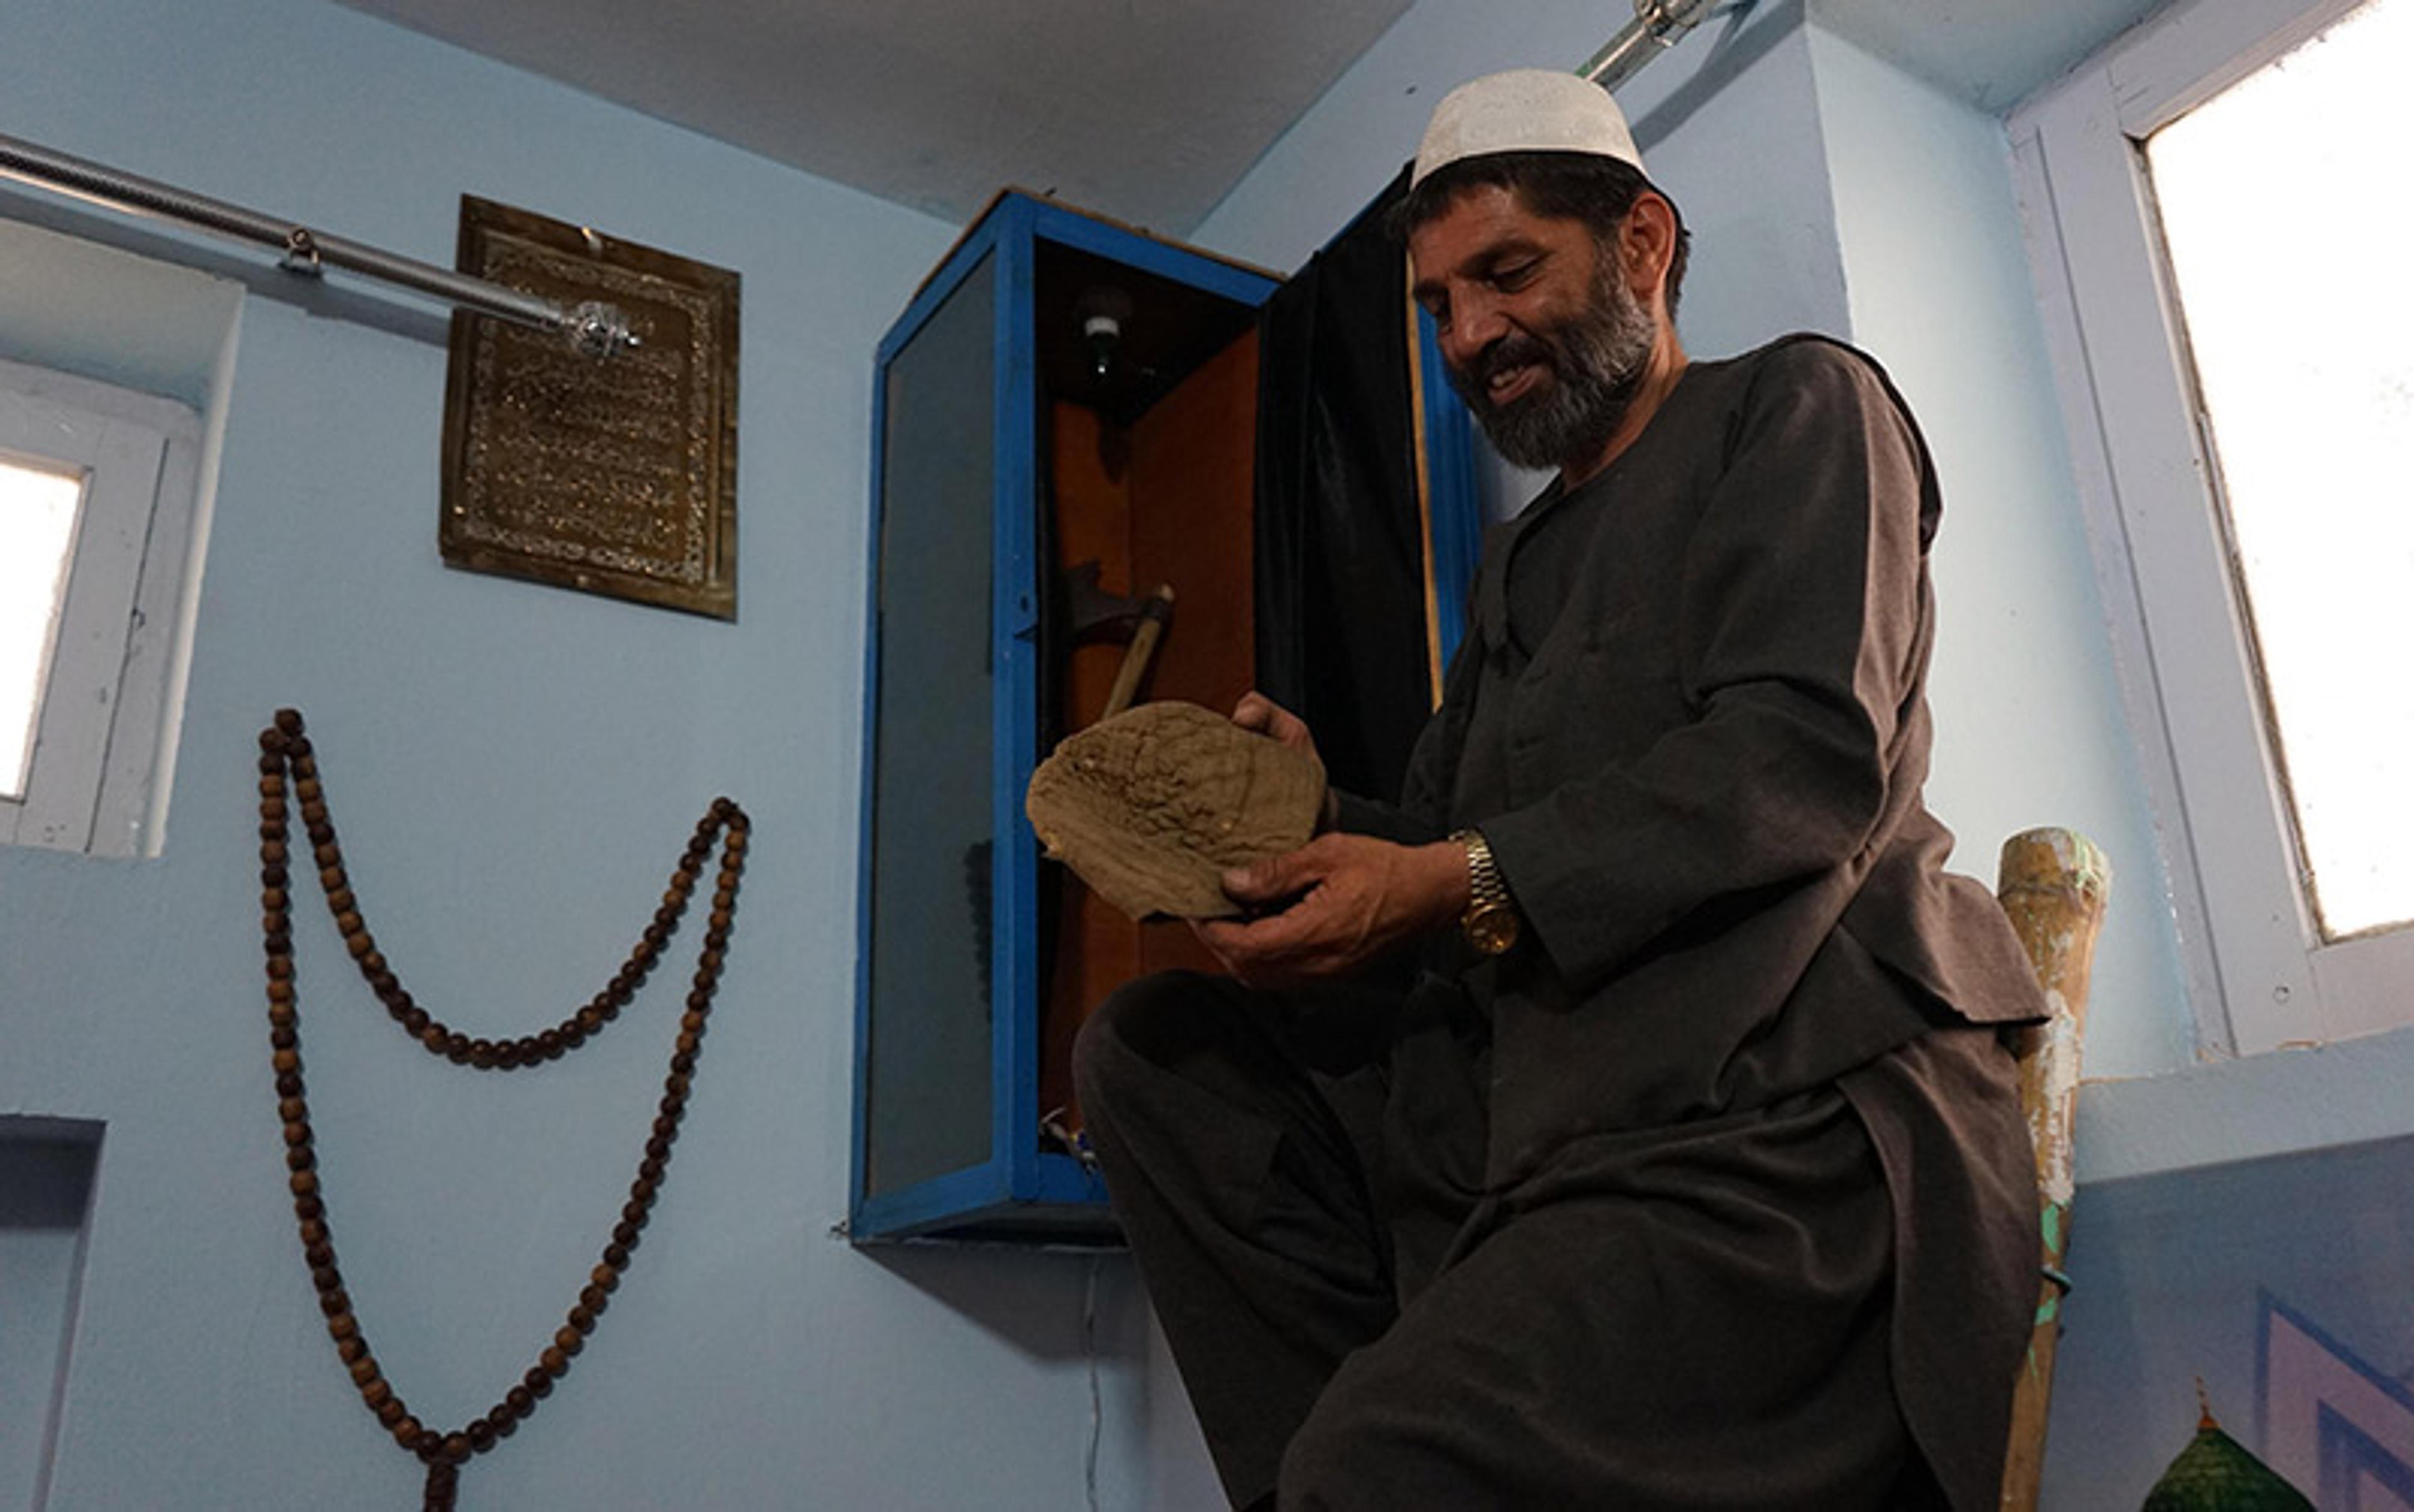 A smiling man displays an old cap taken from a wall cabinet